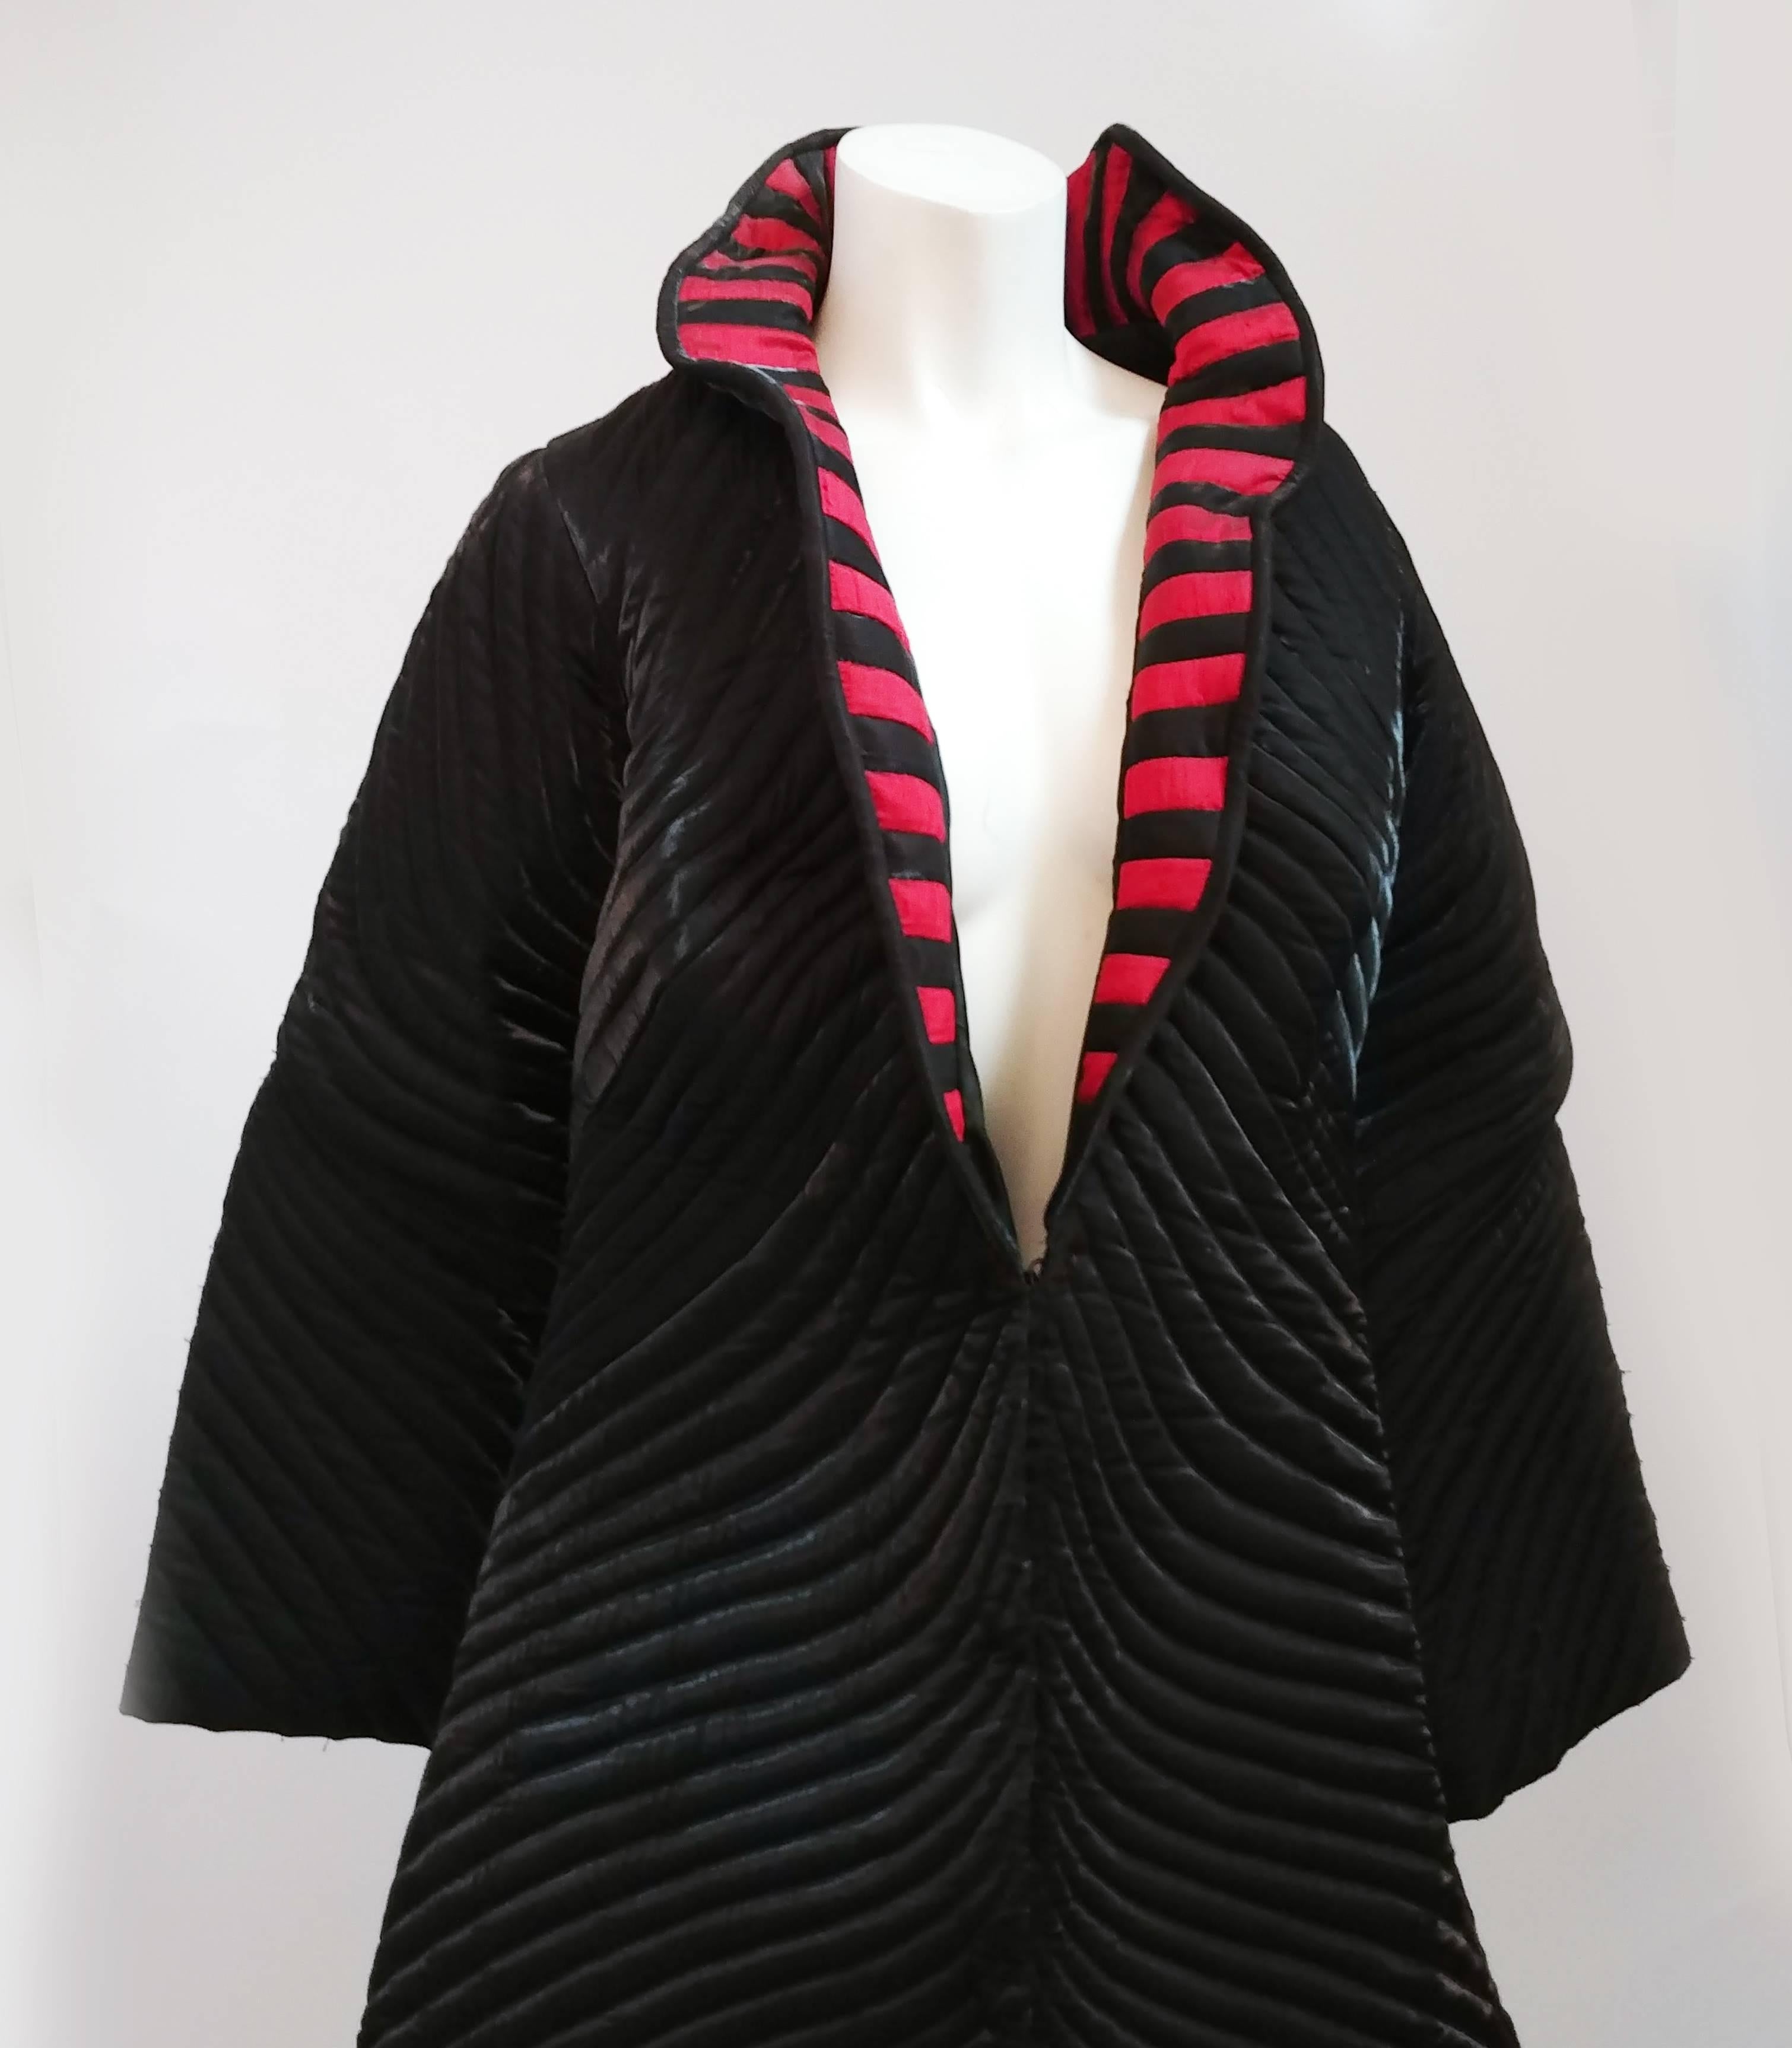 Structured Quilted Stripe Coat, 1980s. Quilted theatrical coat with red and black stripped wired standup collar. Large snap front closures.